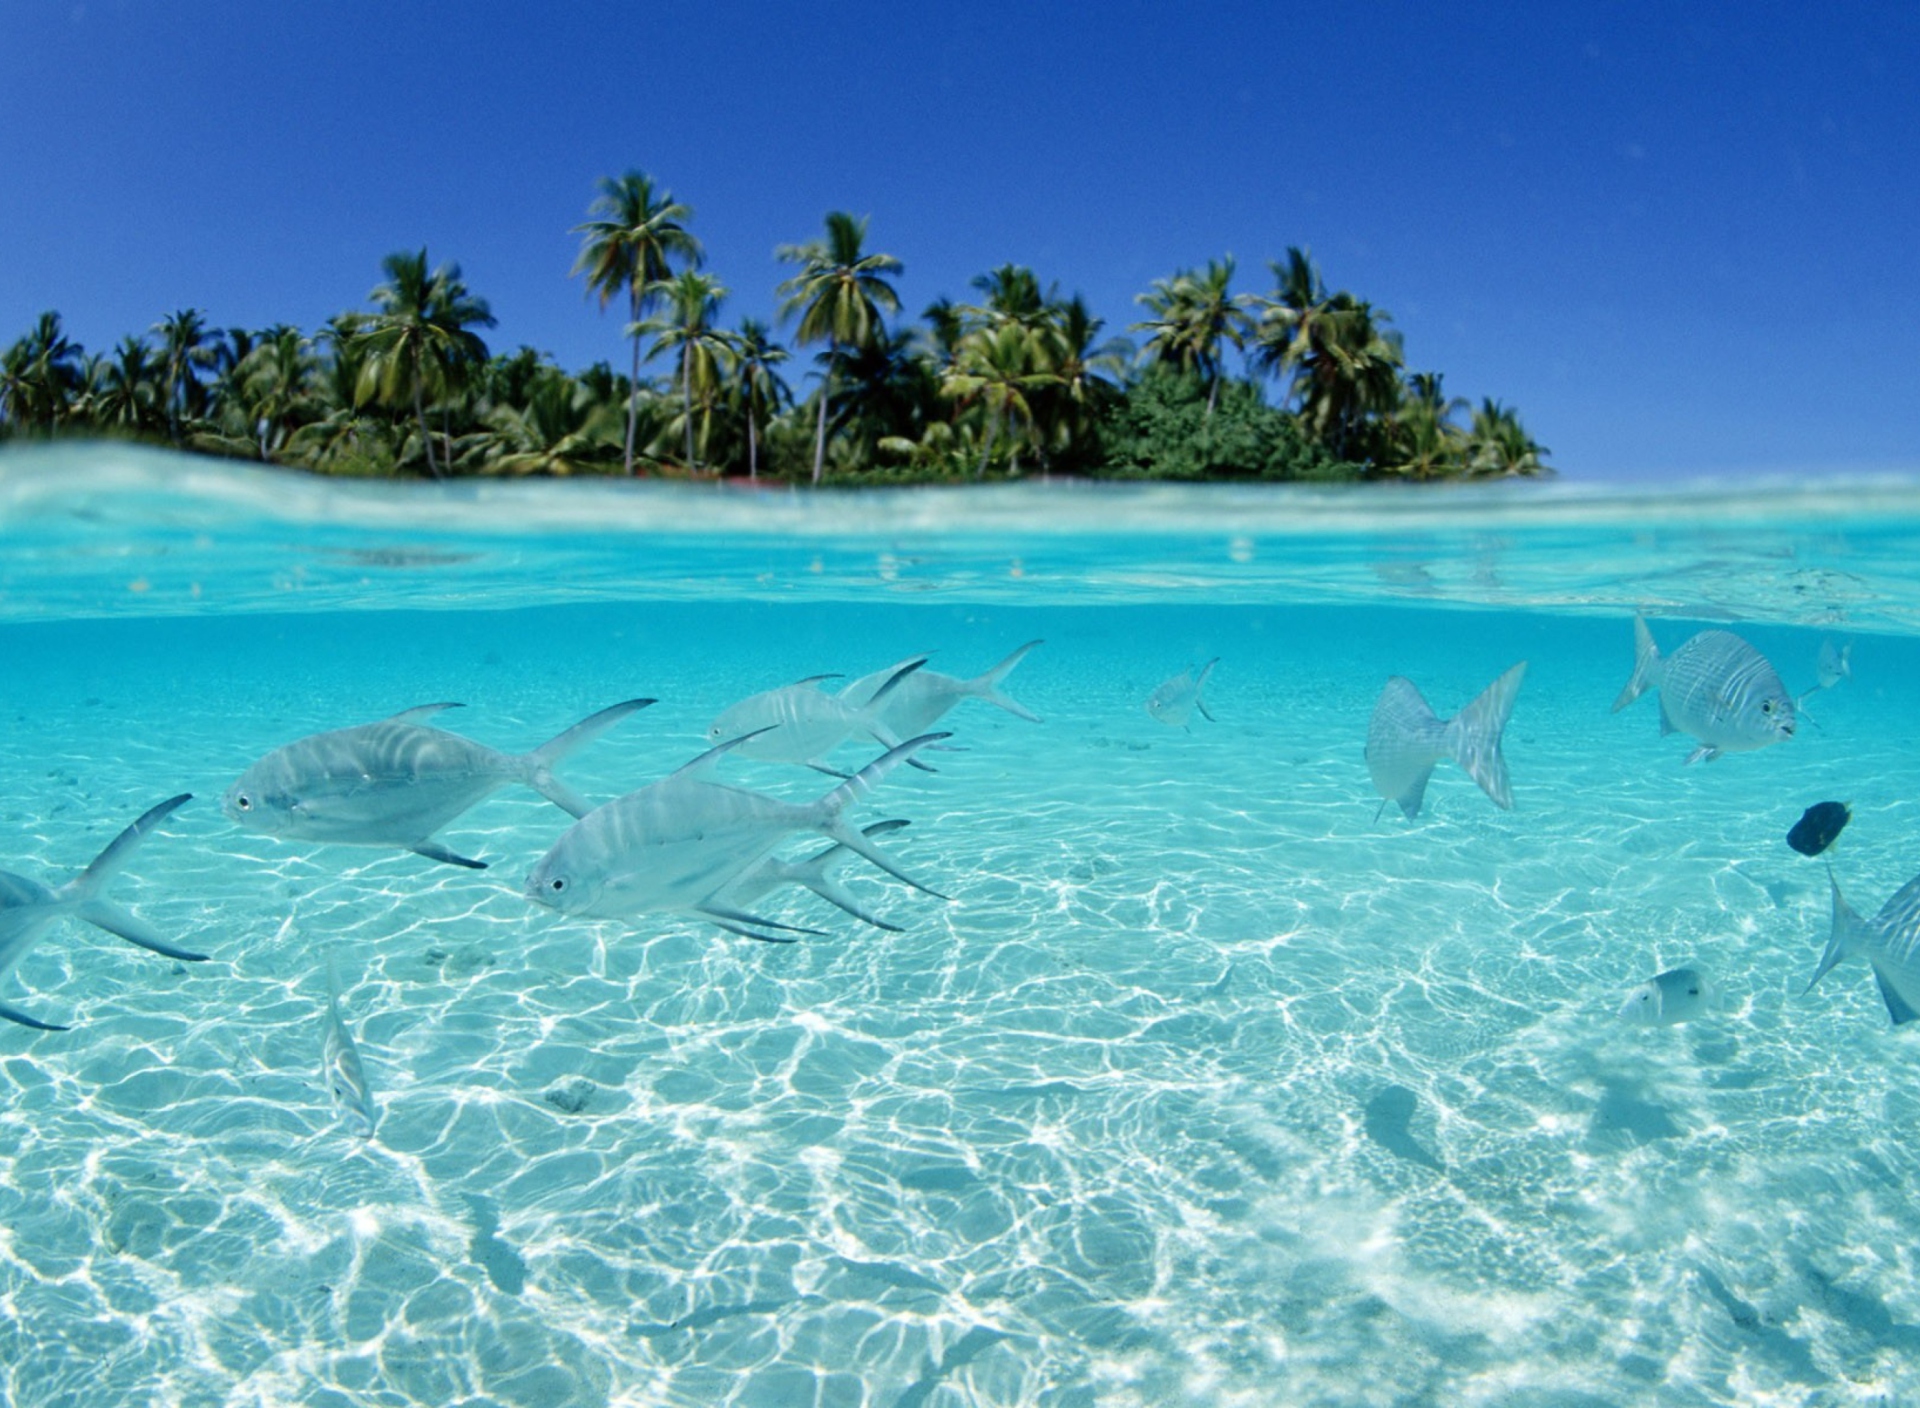 Tropical Island And Fish In Blue Sea wallpaper 1920x1408